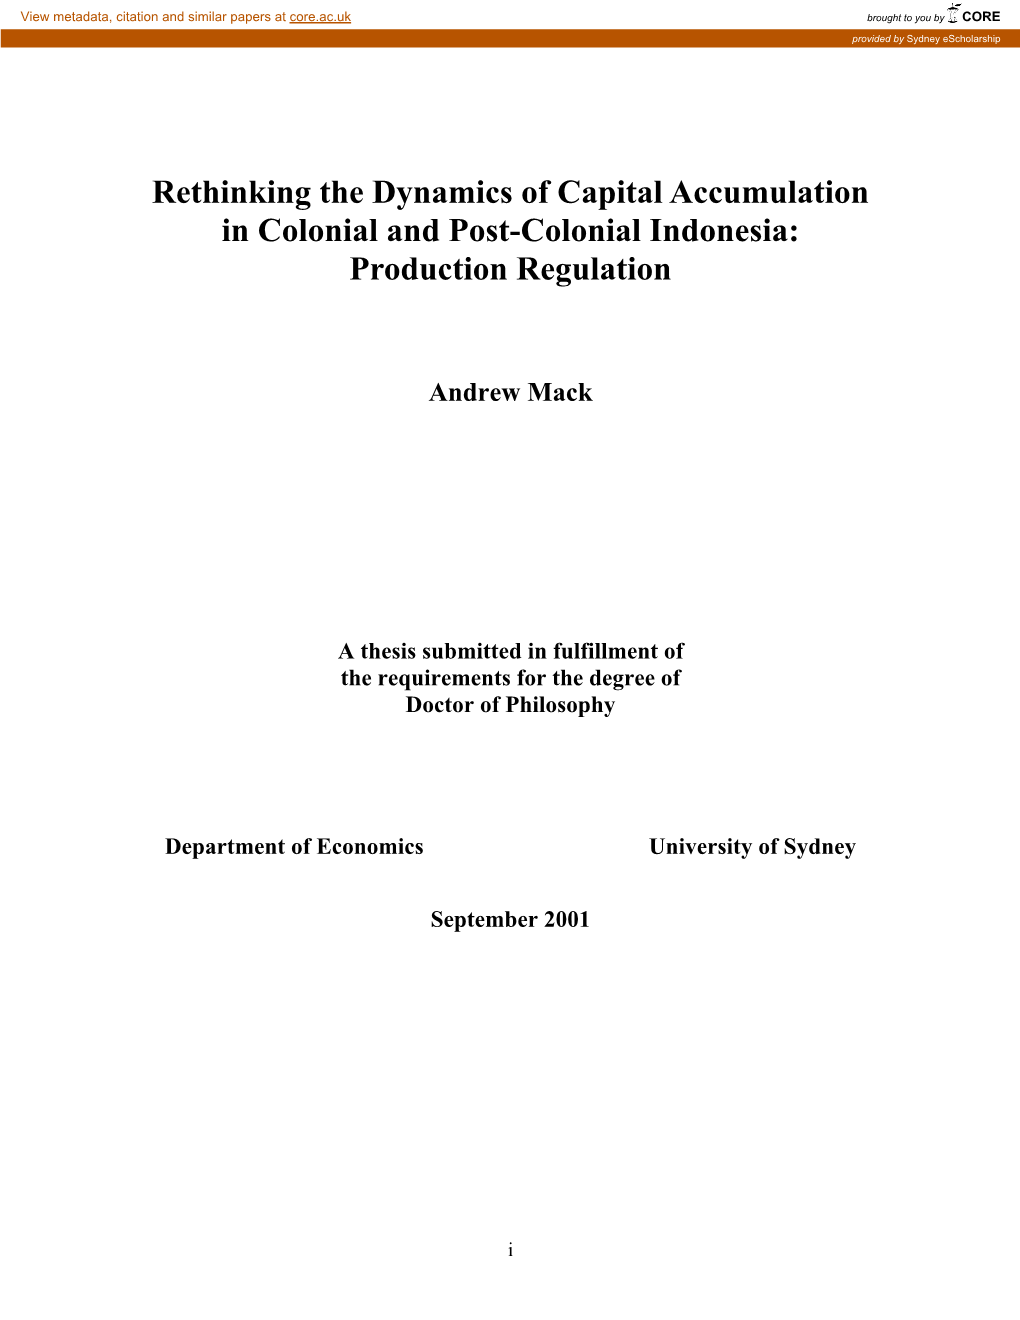 Rethinking the Dynamics of Capital Accumulation in Colonial and Post-Colonial Indonesia: Production Regulation